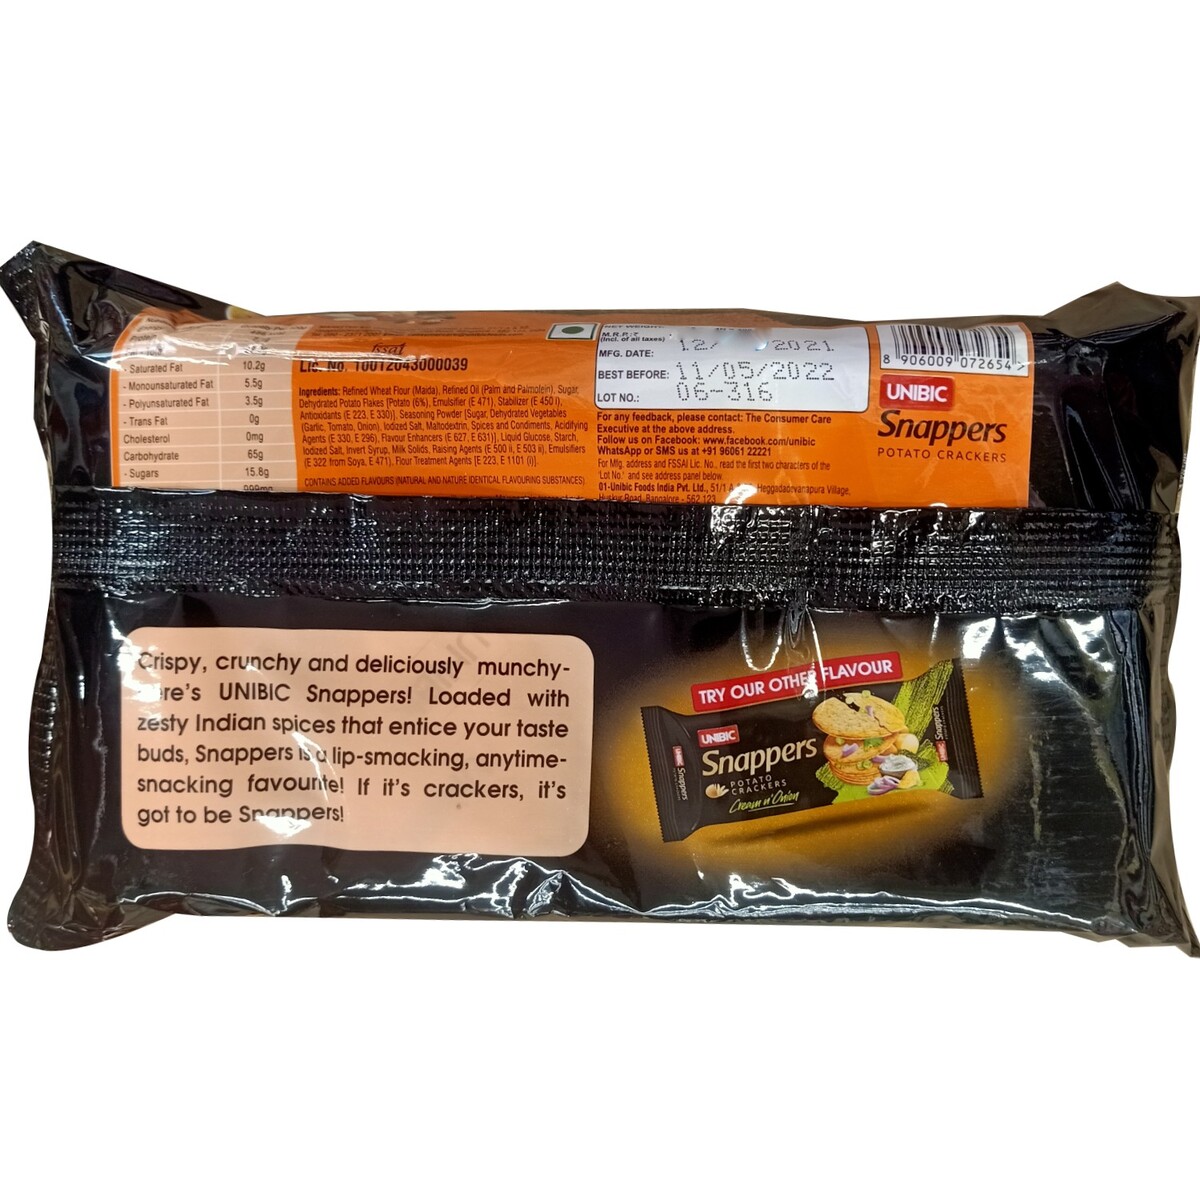 Unibic Snappers Indi Spice 300g